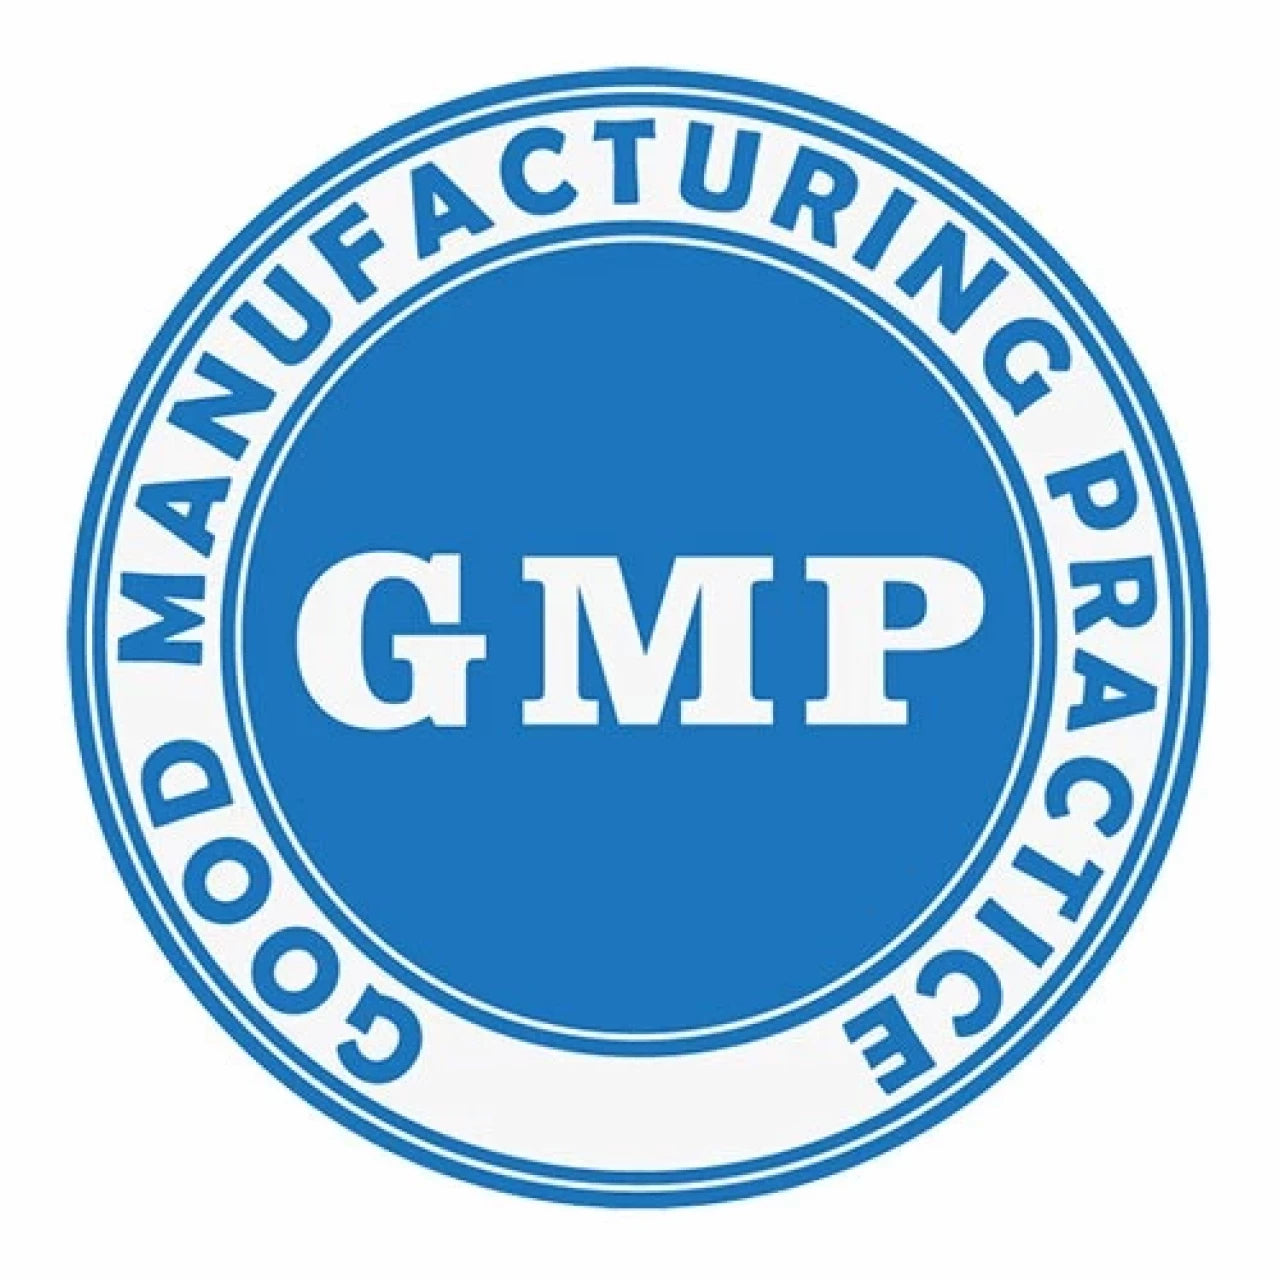 Blue circular logo with 'GMP' in the center and 'GOOD MANUFACTURING PRACTICE' around the edge.